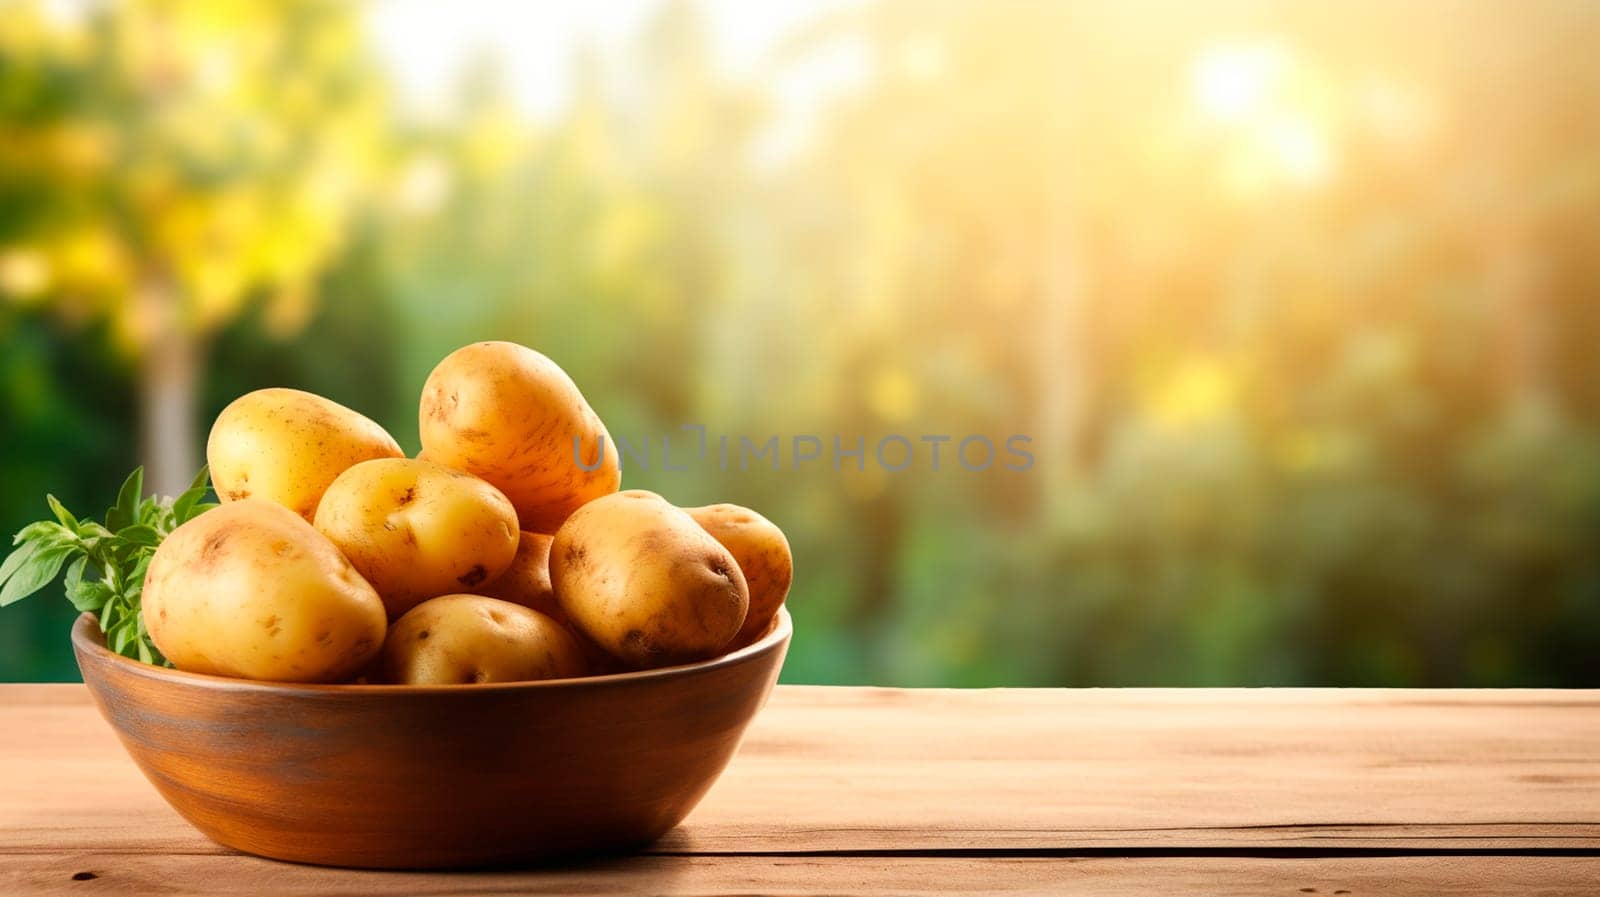 Potatoes in a bowl against the backdrop of the garden. Selective focus. Food.